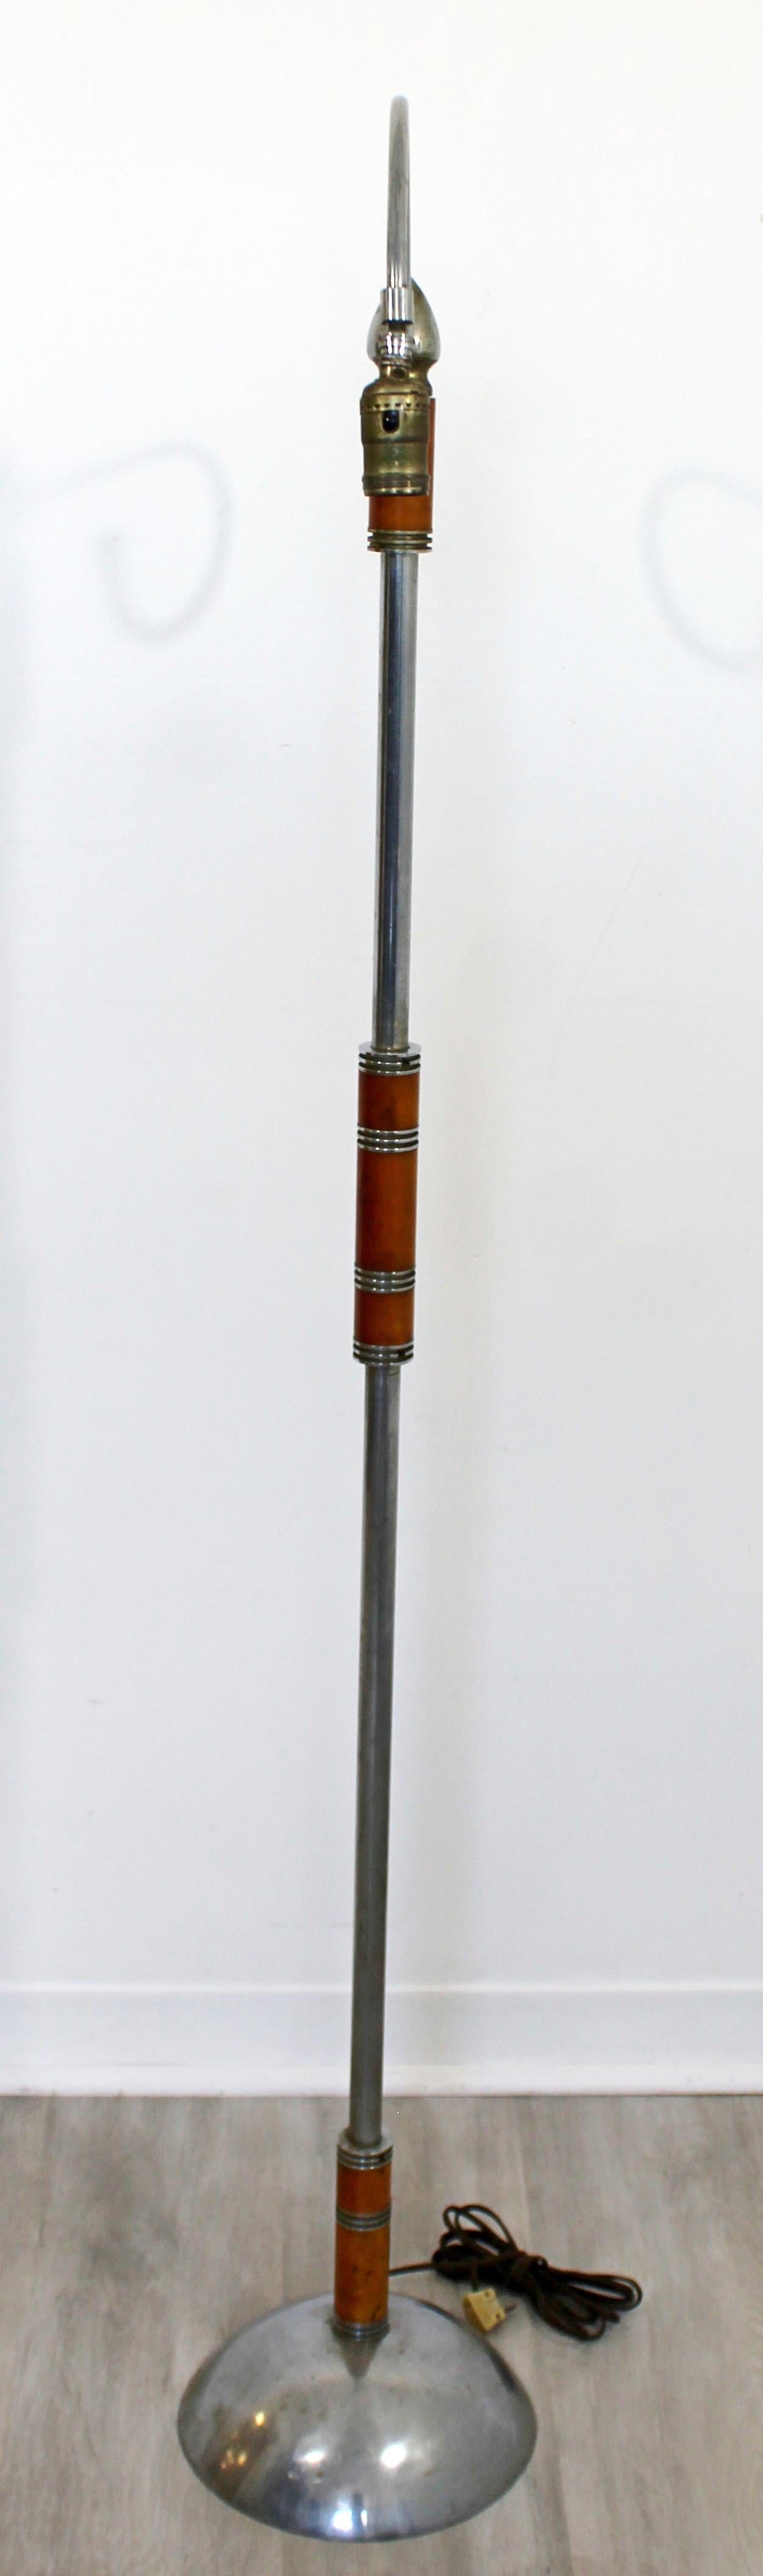 For your consideration is a wonderfully sculptural floor lamp, by Bakelite, circa 1930s-1940s. In excellent vintage condition. The dimensions are 21